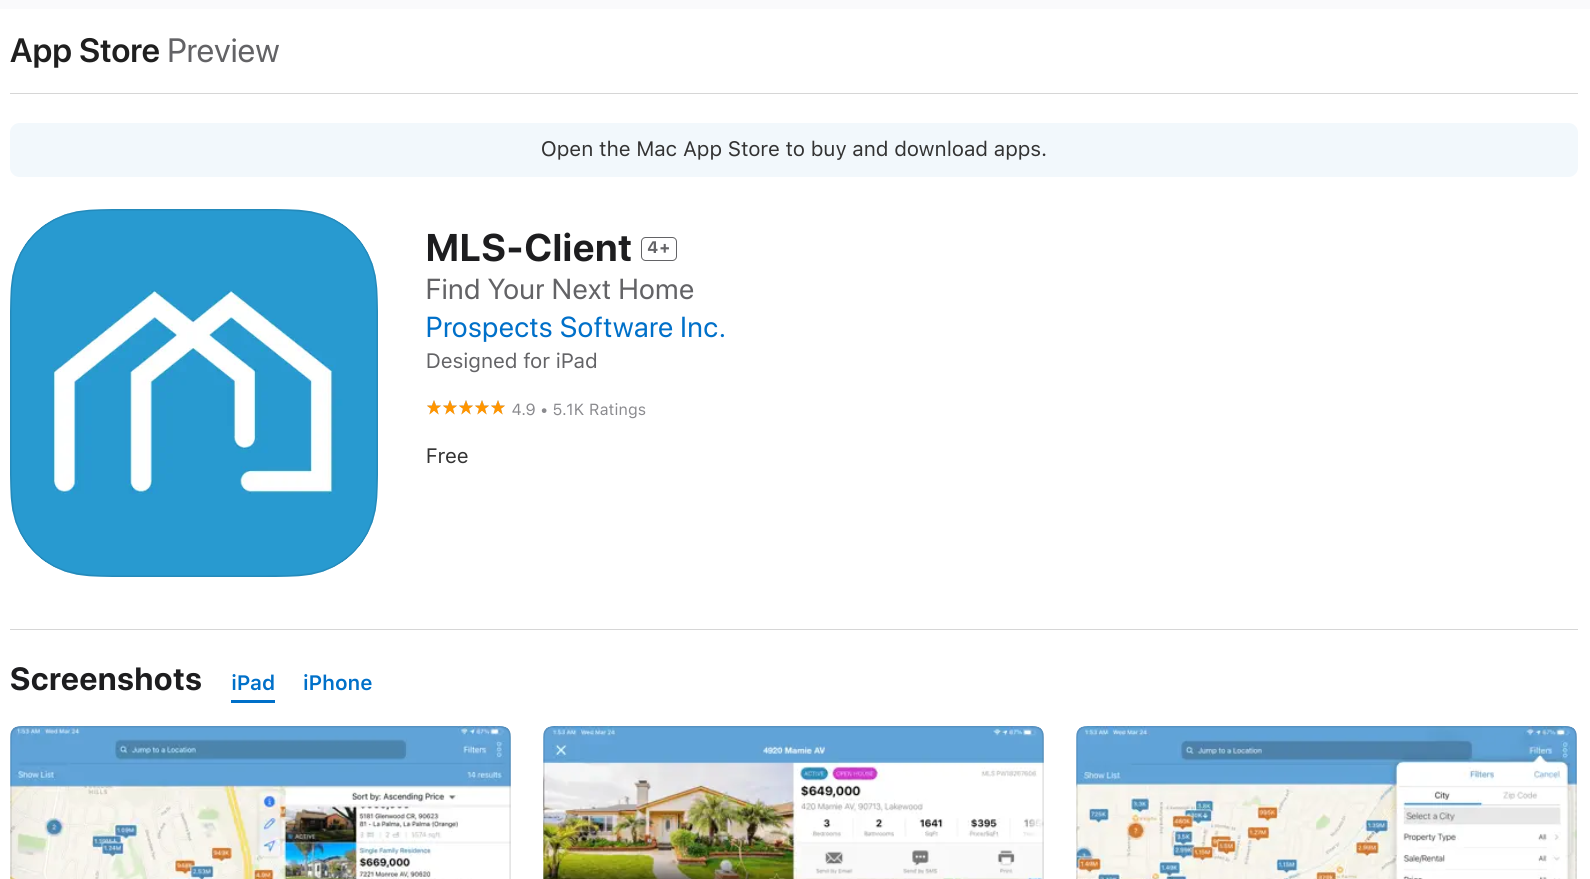 MLS-Client: Find Your Next Home